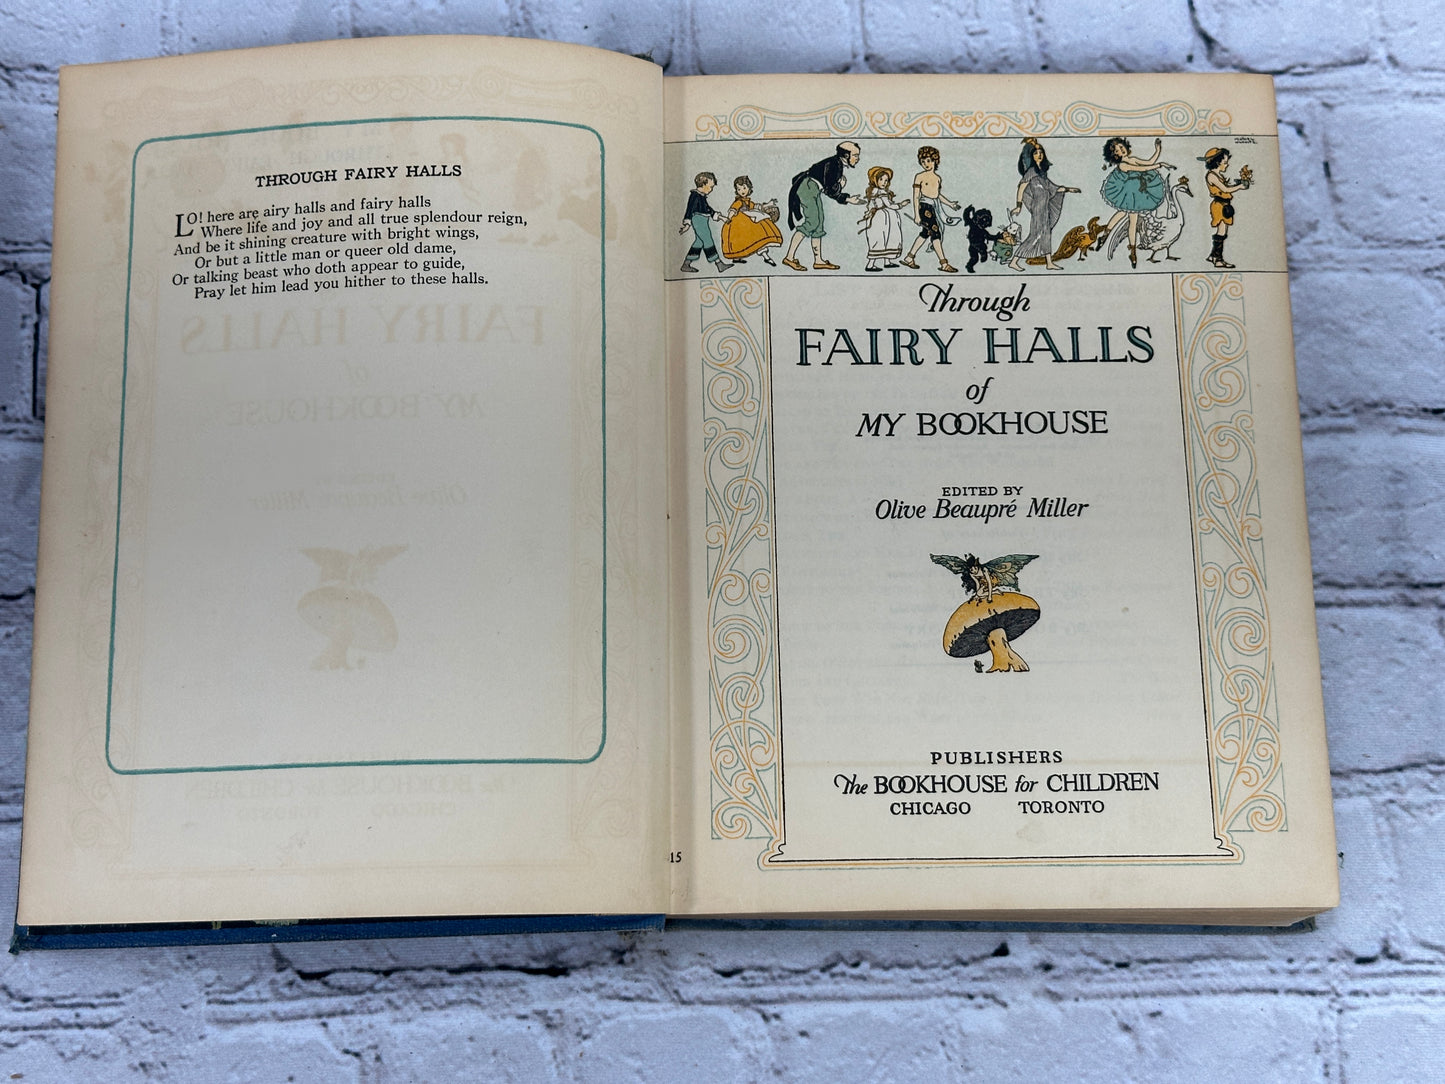 Through Fairy Halls of My Book House, edited by Olive Beaupre Miller [1928]